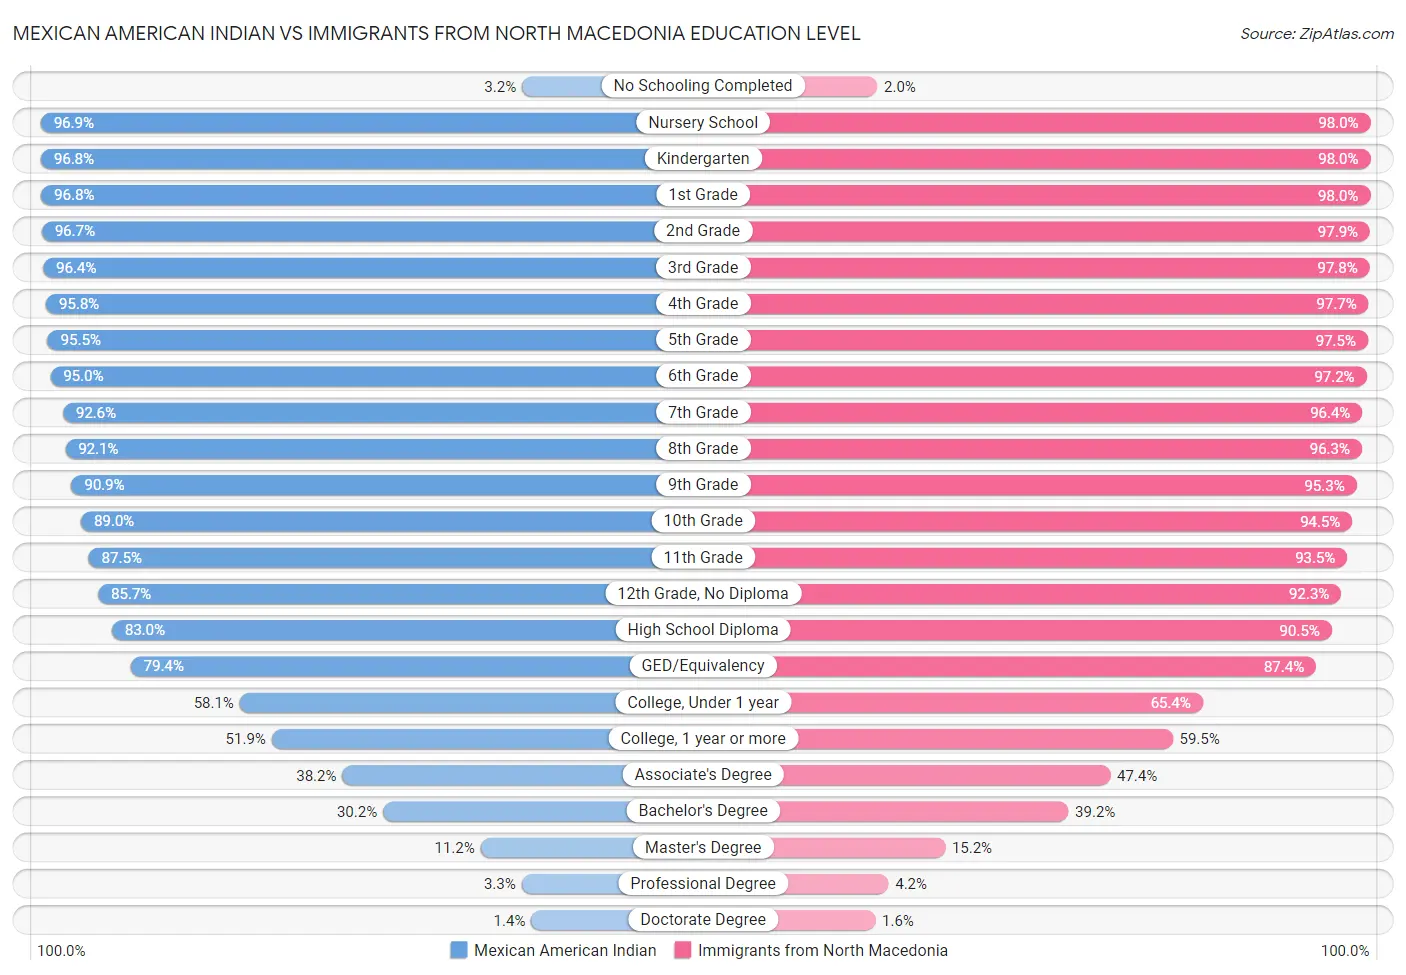 Mexican American Indian vs Immigrants from North Macedonia Education Level